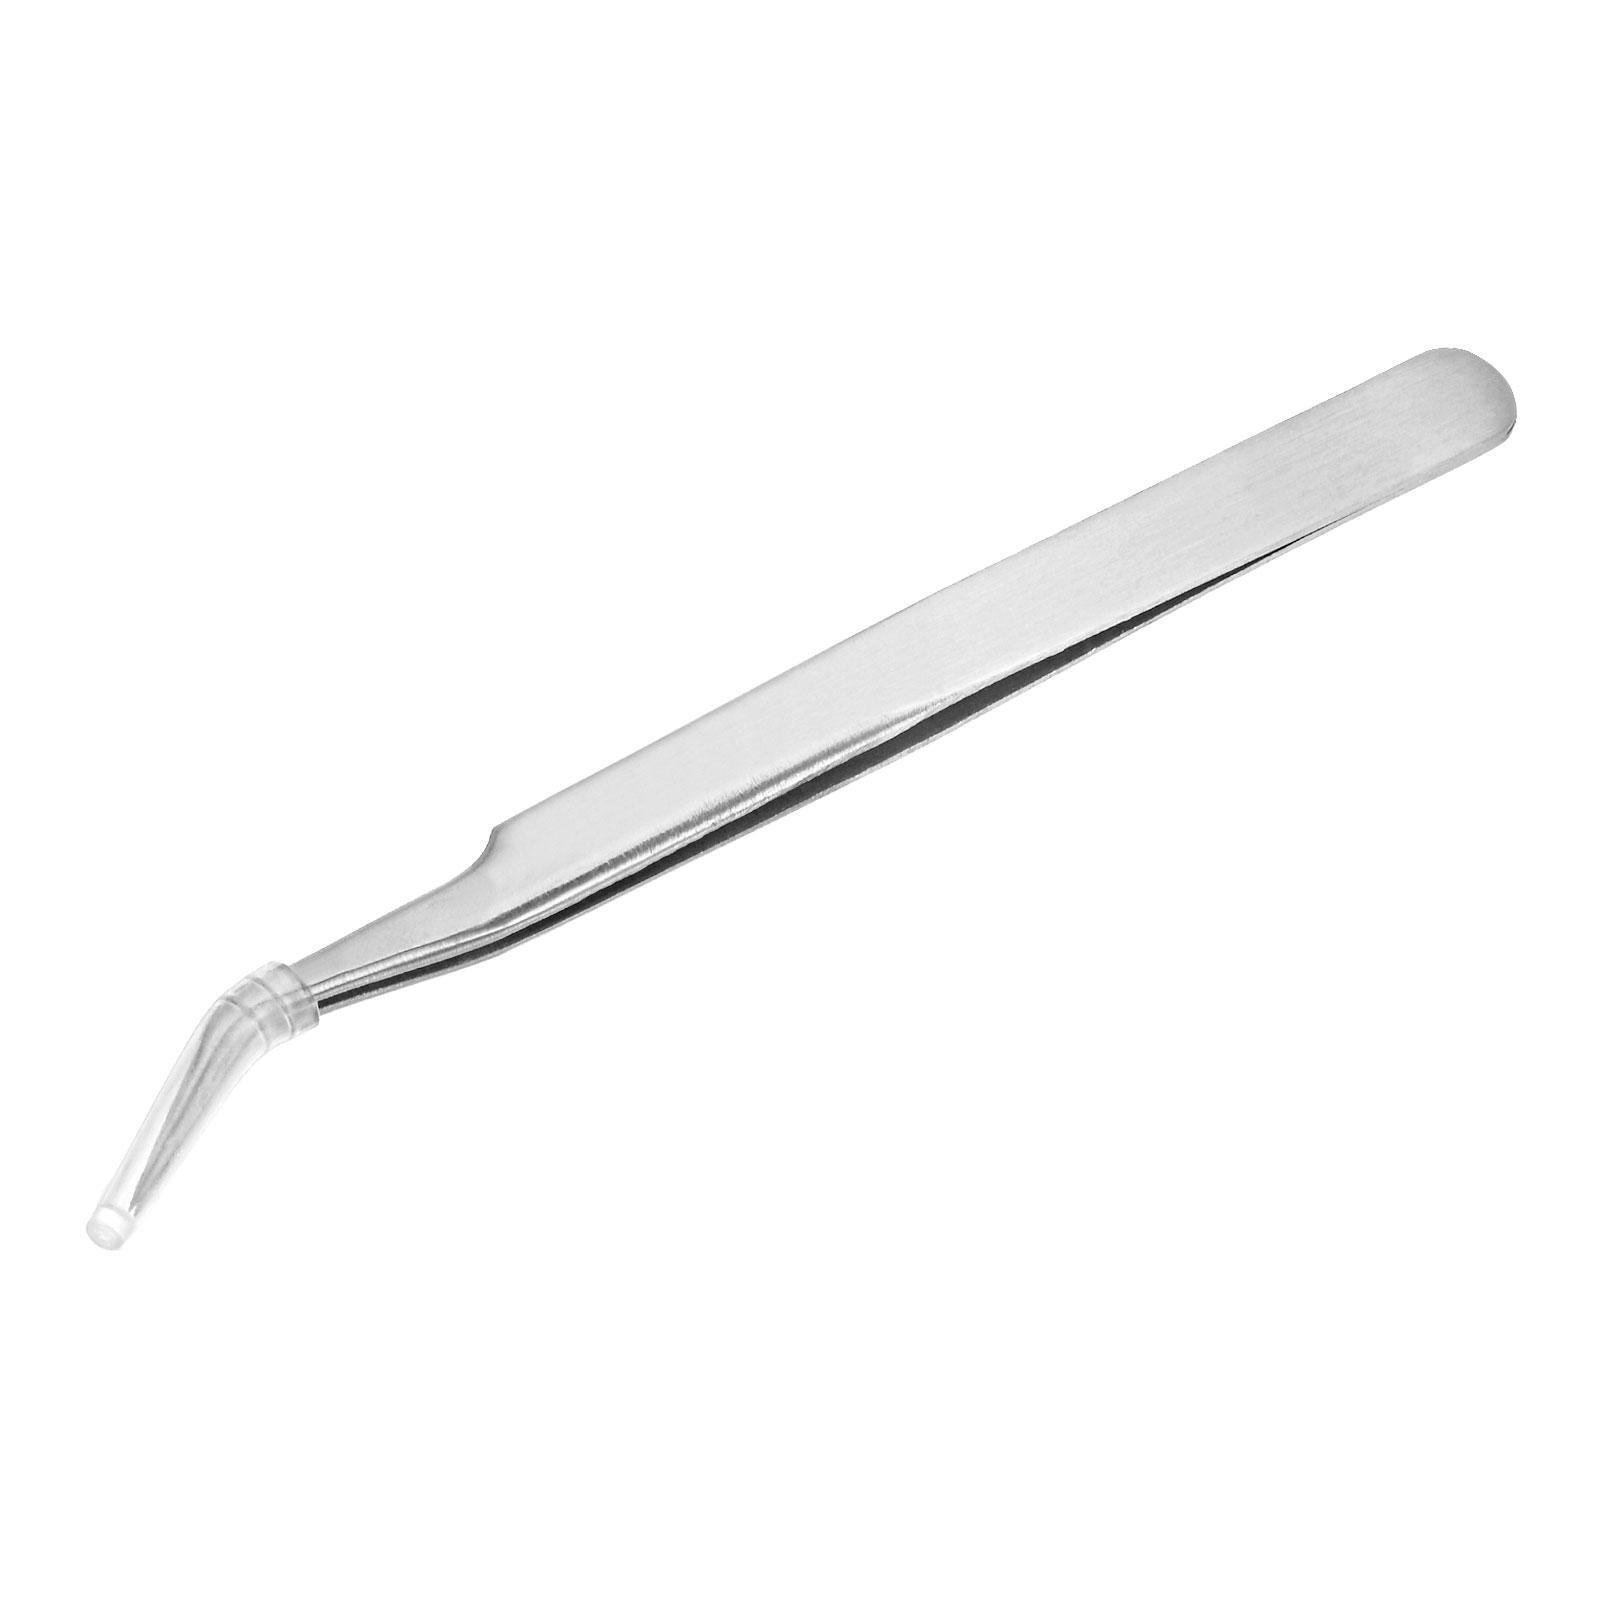 Precision Curved Tip Tweezer Stainless Steel Silver Tone